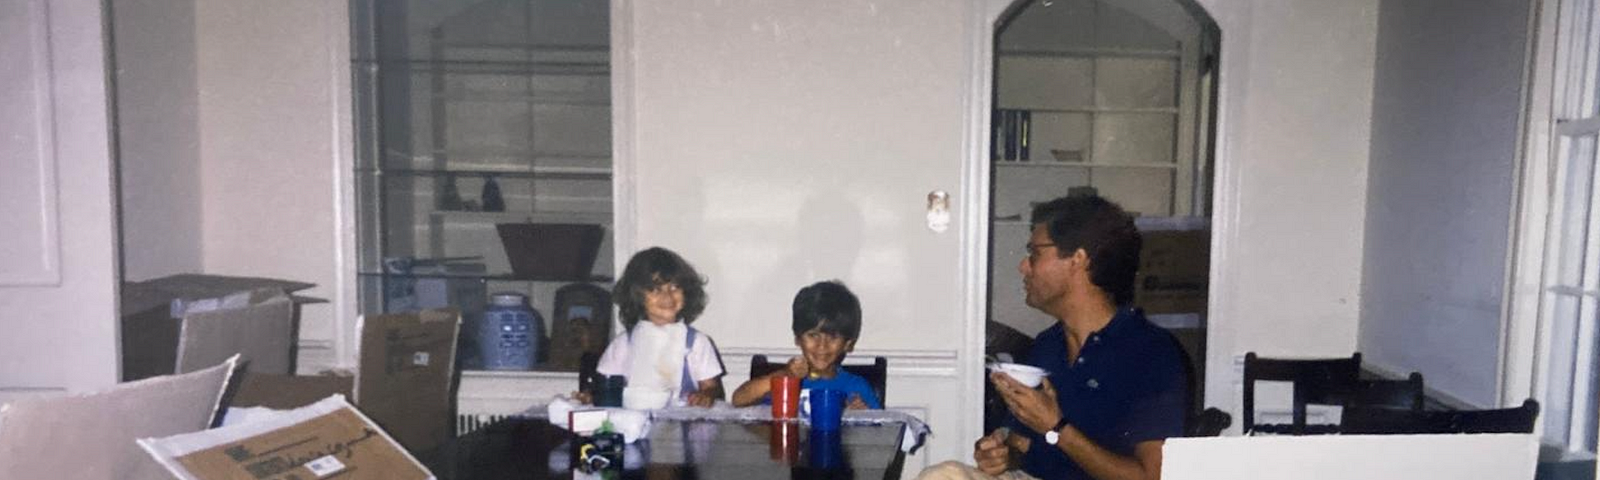 two children and one man sitting at dinner table in an empty house with moving boxes